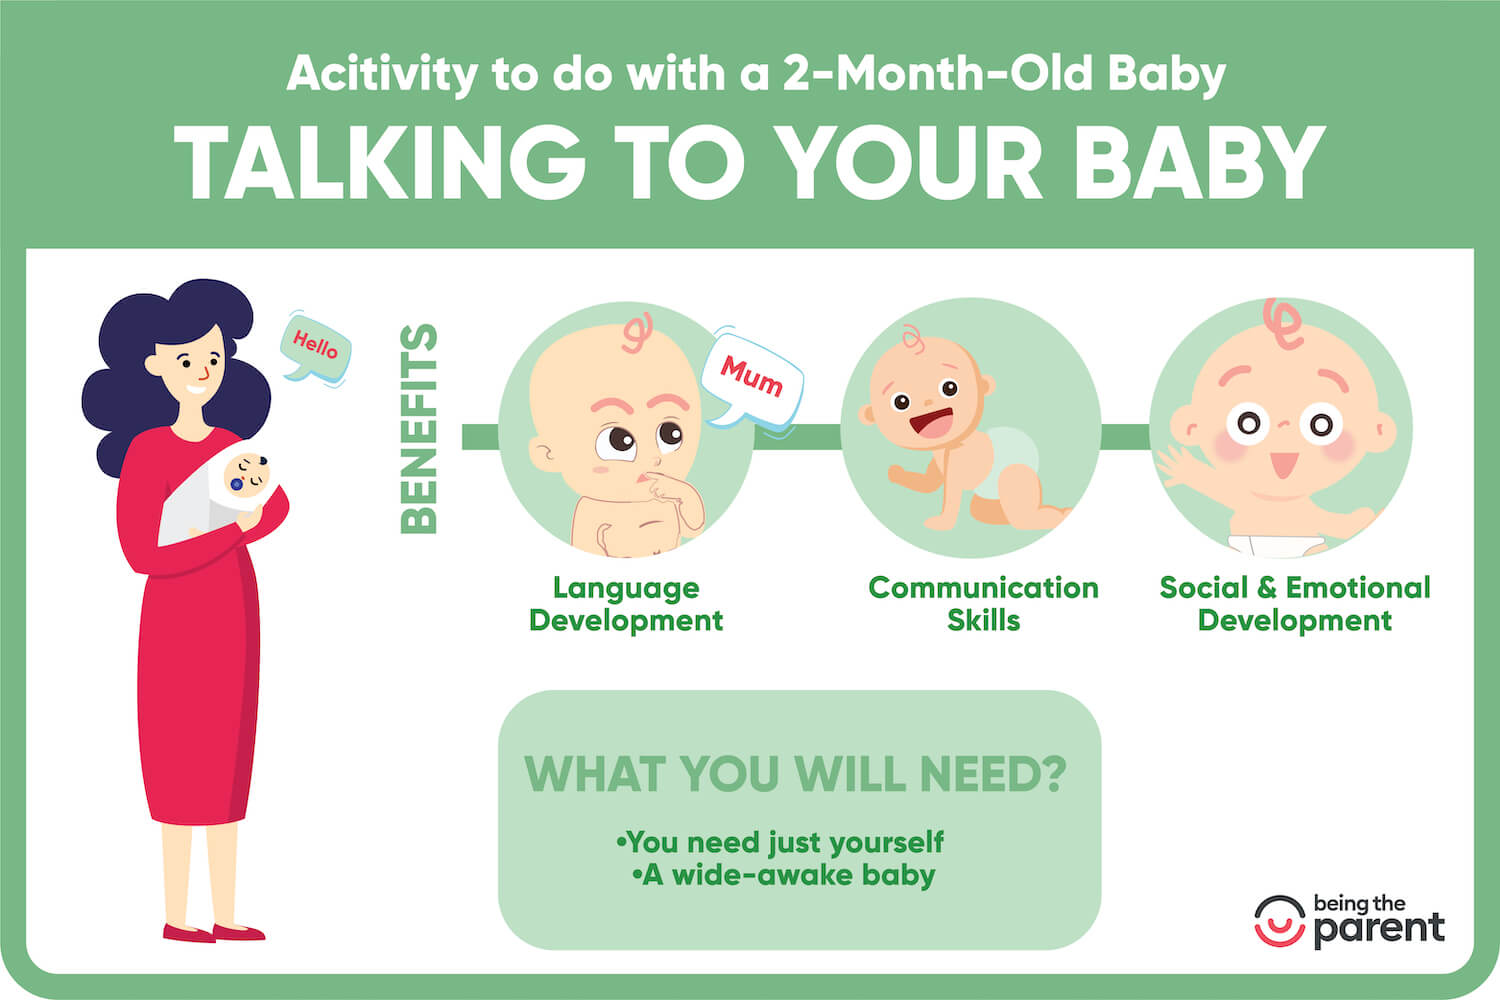 Talking to your baby